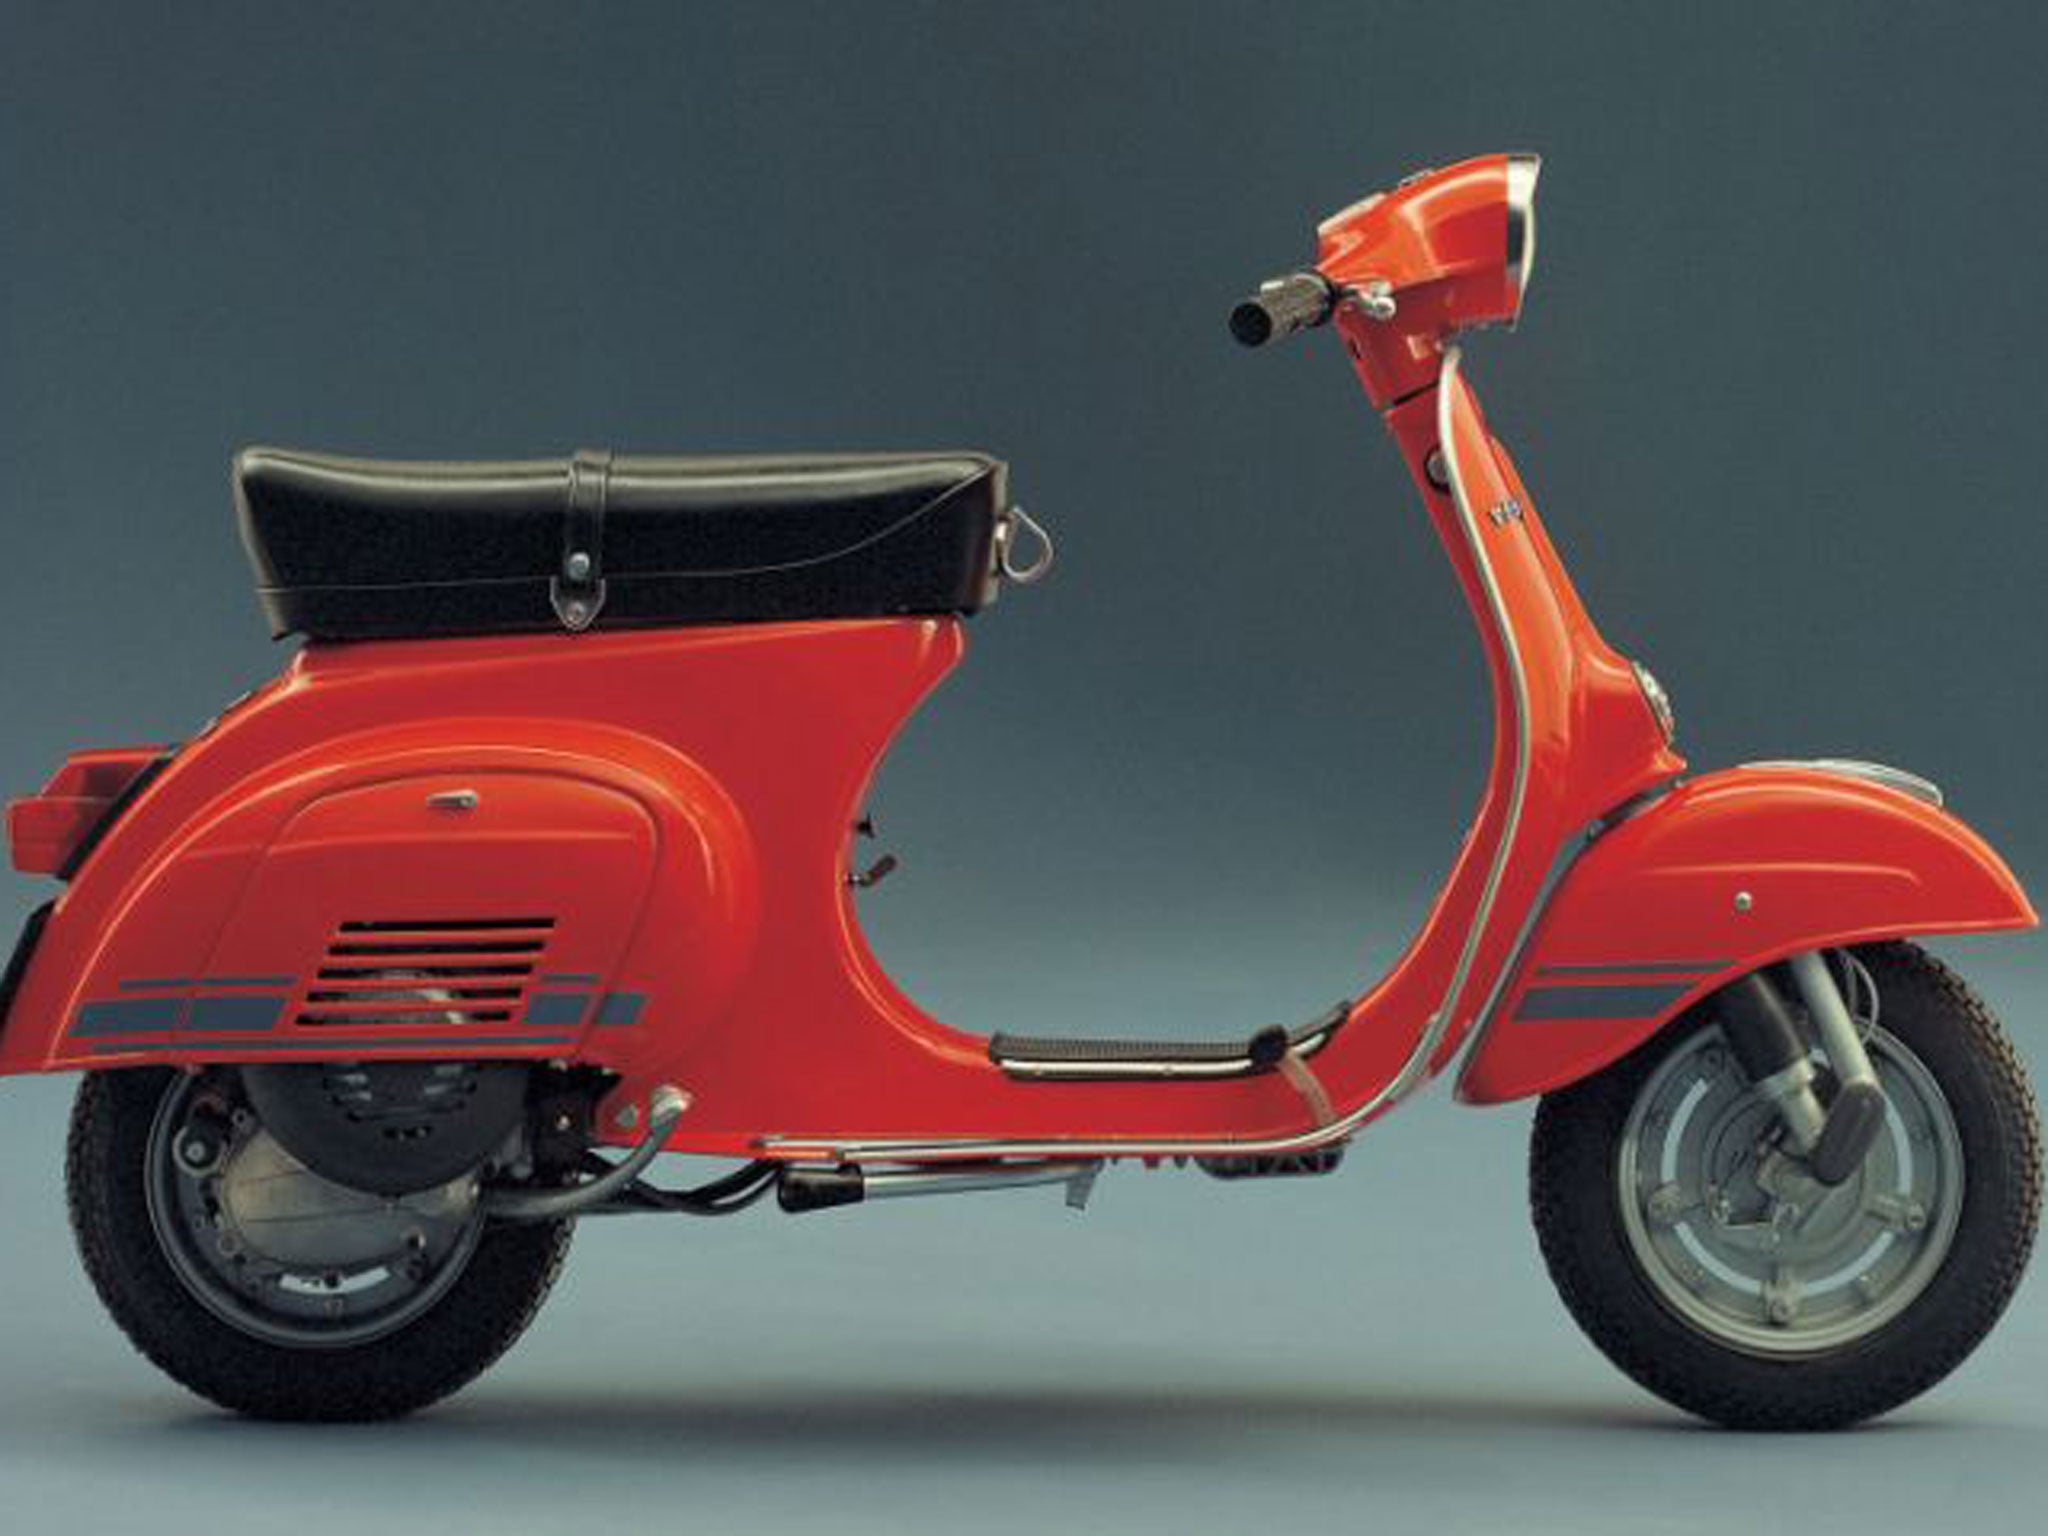 Wasp factory: 1.3 million examples of the Vespa scooter have been sold in the last decade